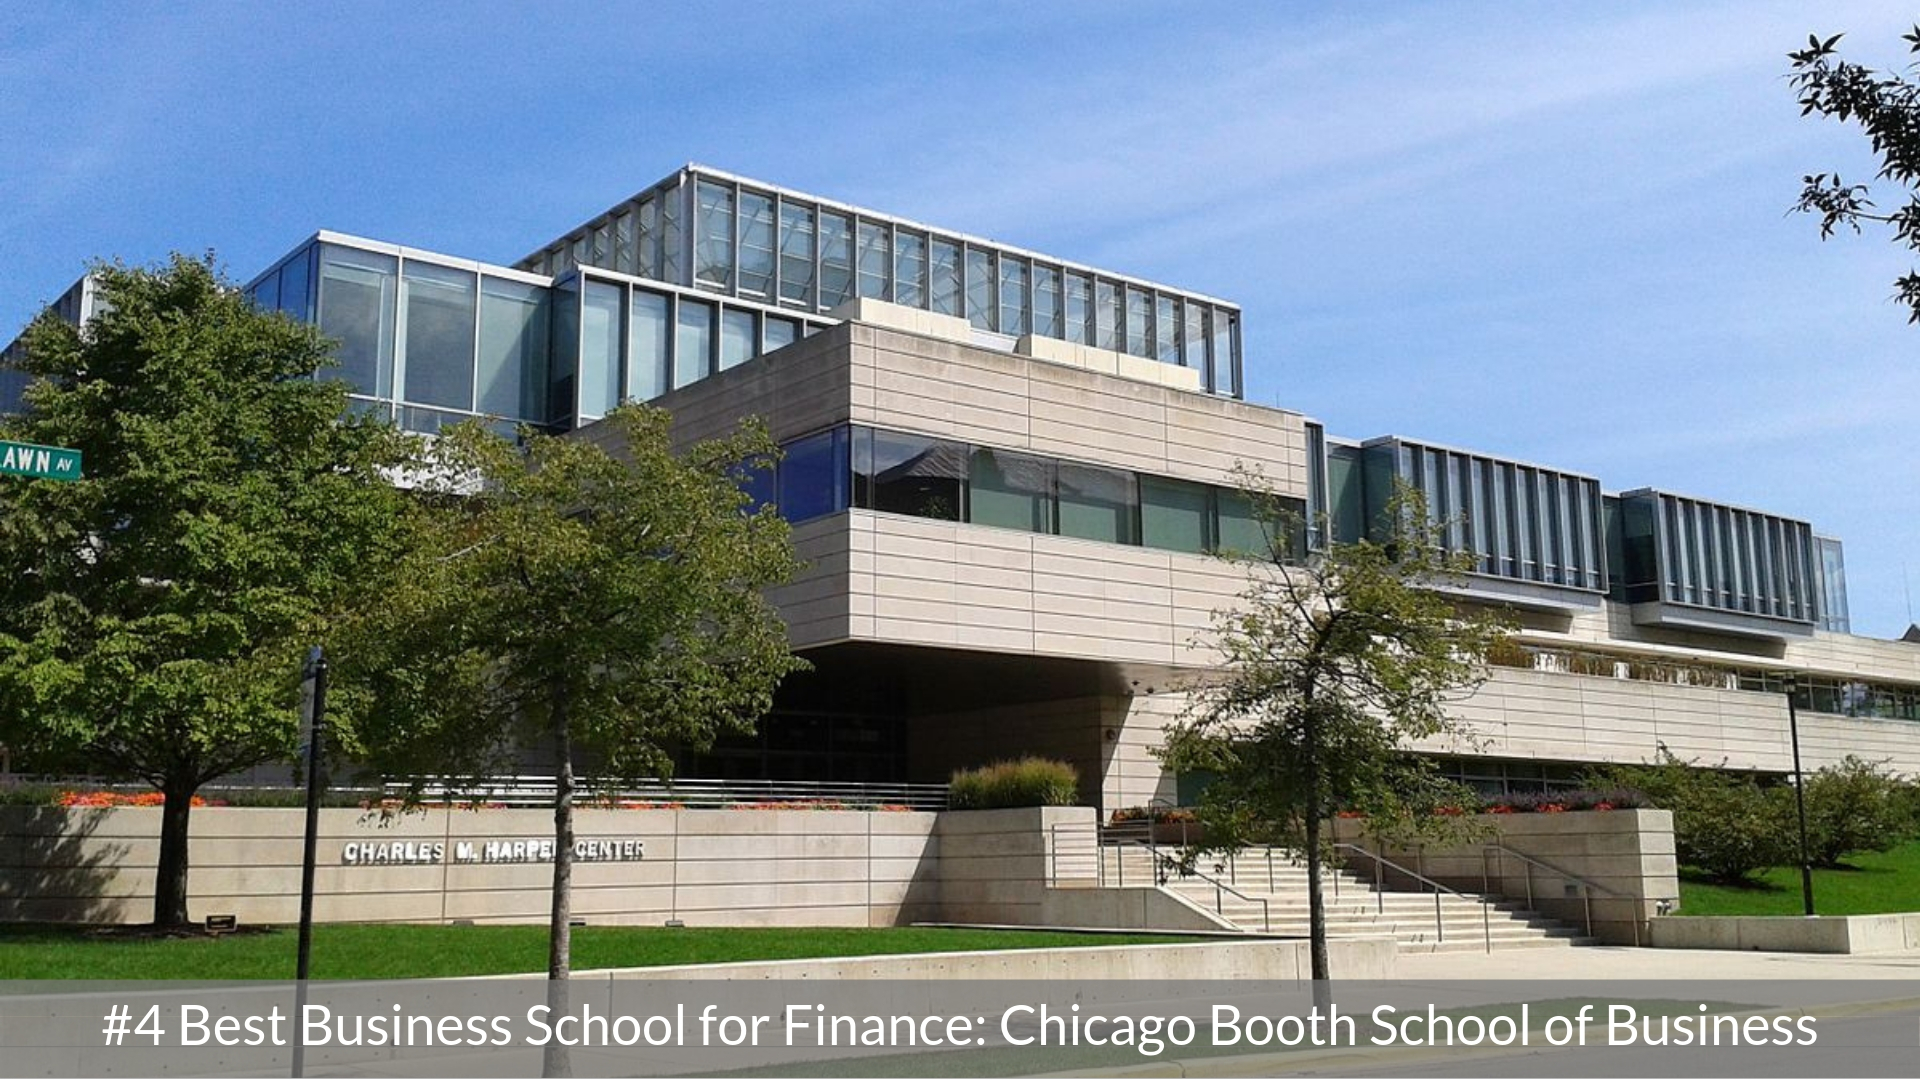 Best Business School for Finance #4 - Chicago Booth School of Business - Top MBA Program in Finance - Top MBA Program for Finance